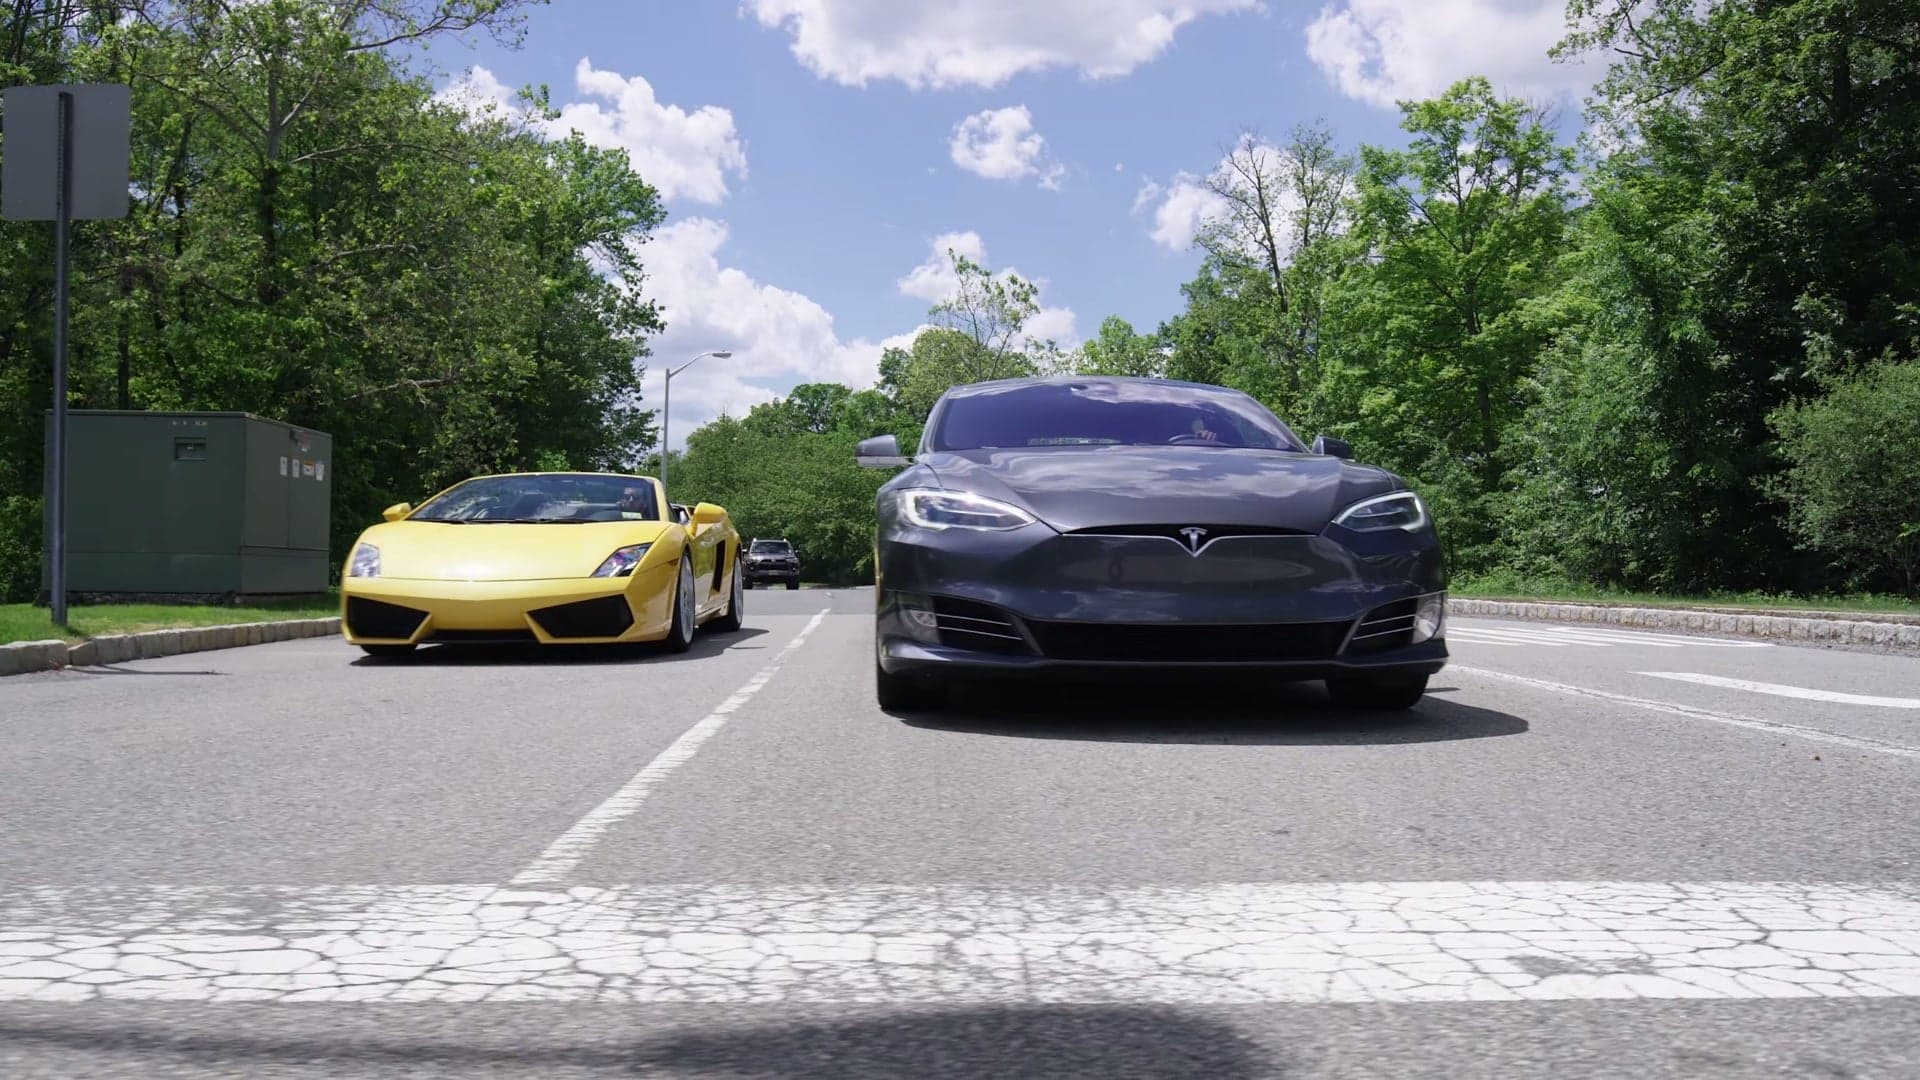 Tesla’s ‘Project Loveday’ Commercial Contest Winners Announced